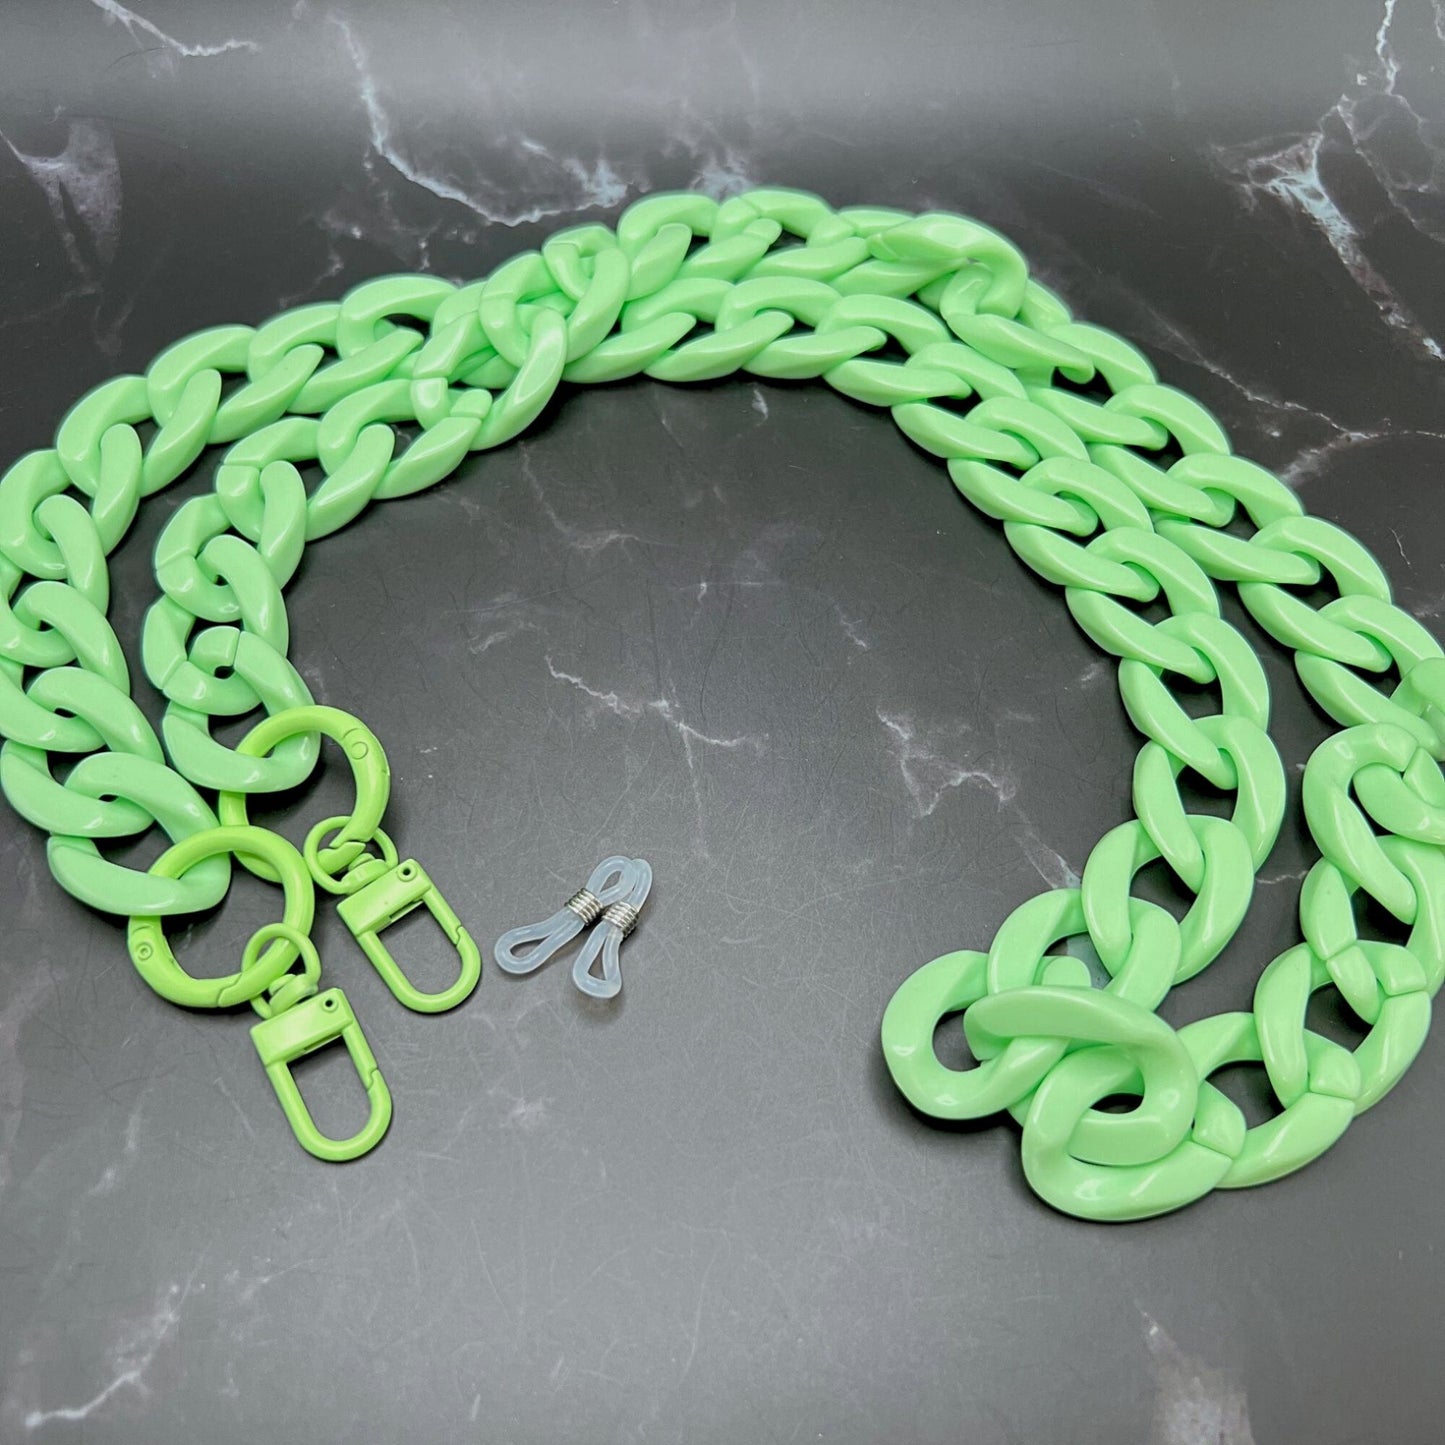 Versatile Green Chunky Chain Link Lanyard for glasses, keys, badges, or masks. Displayed on a table.